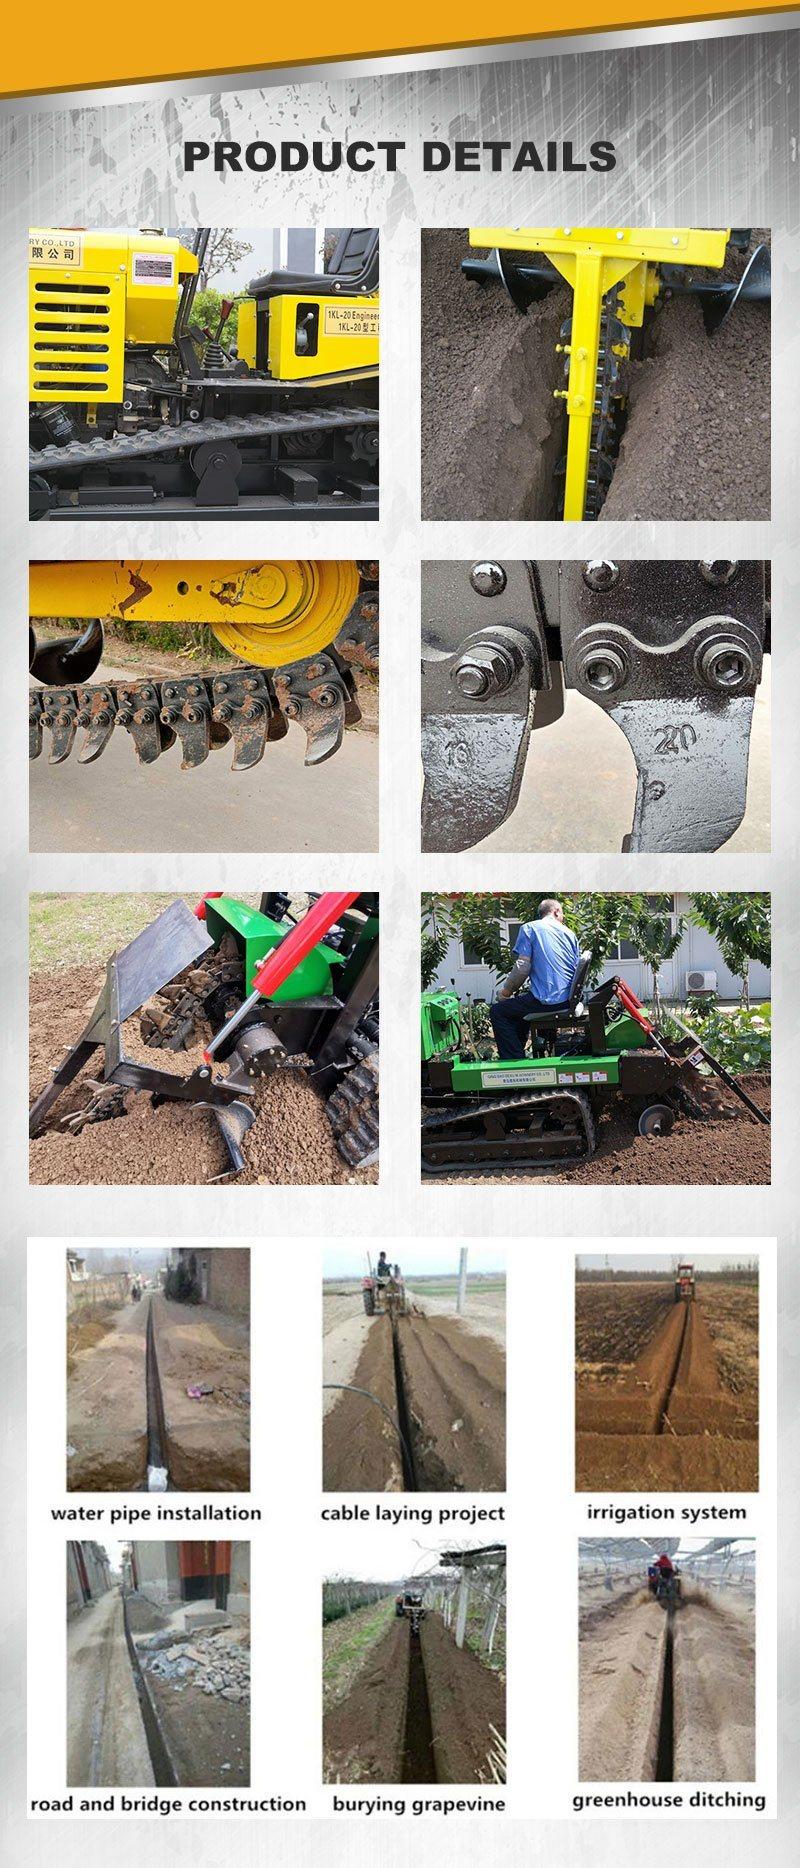 Good Quality Irrigation and Water Conservancy Special Small Pipe Ditching Machine Chain Micro Tractor Trencher for Engineering Construction and Agriculture